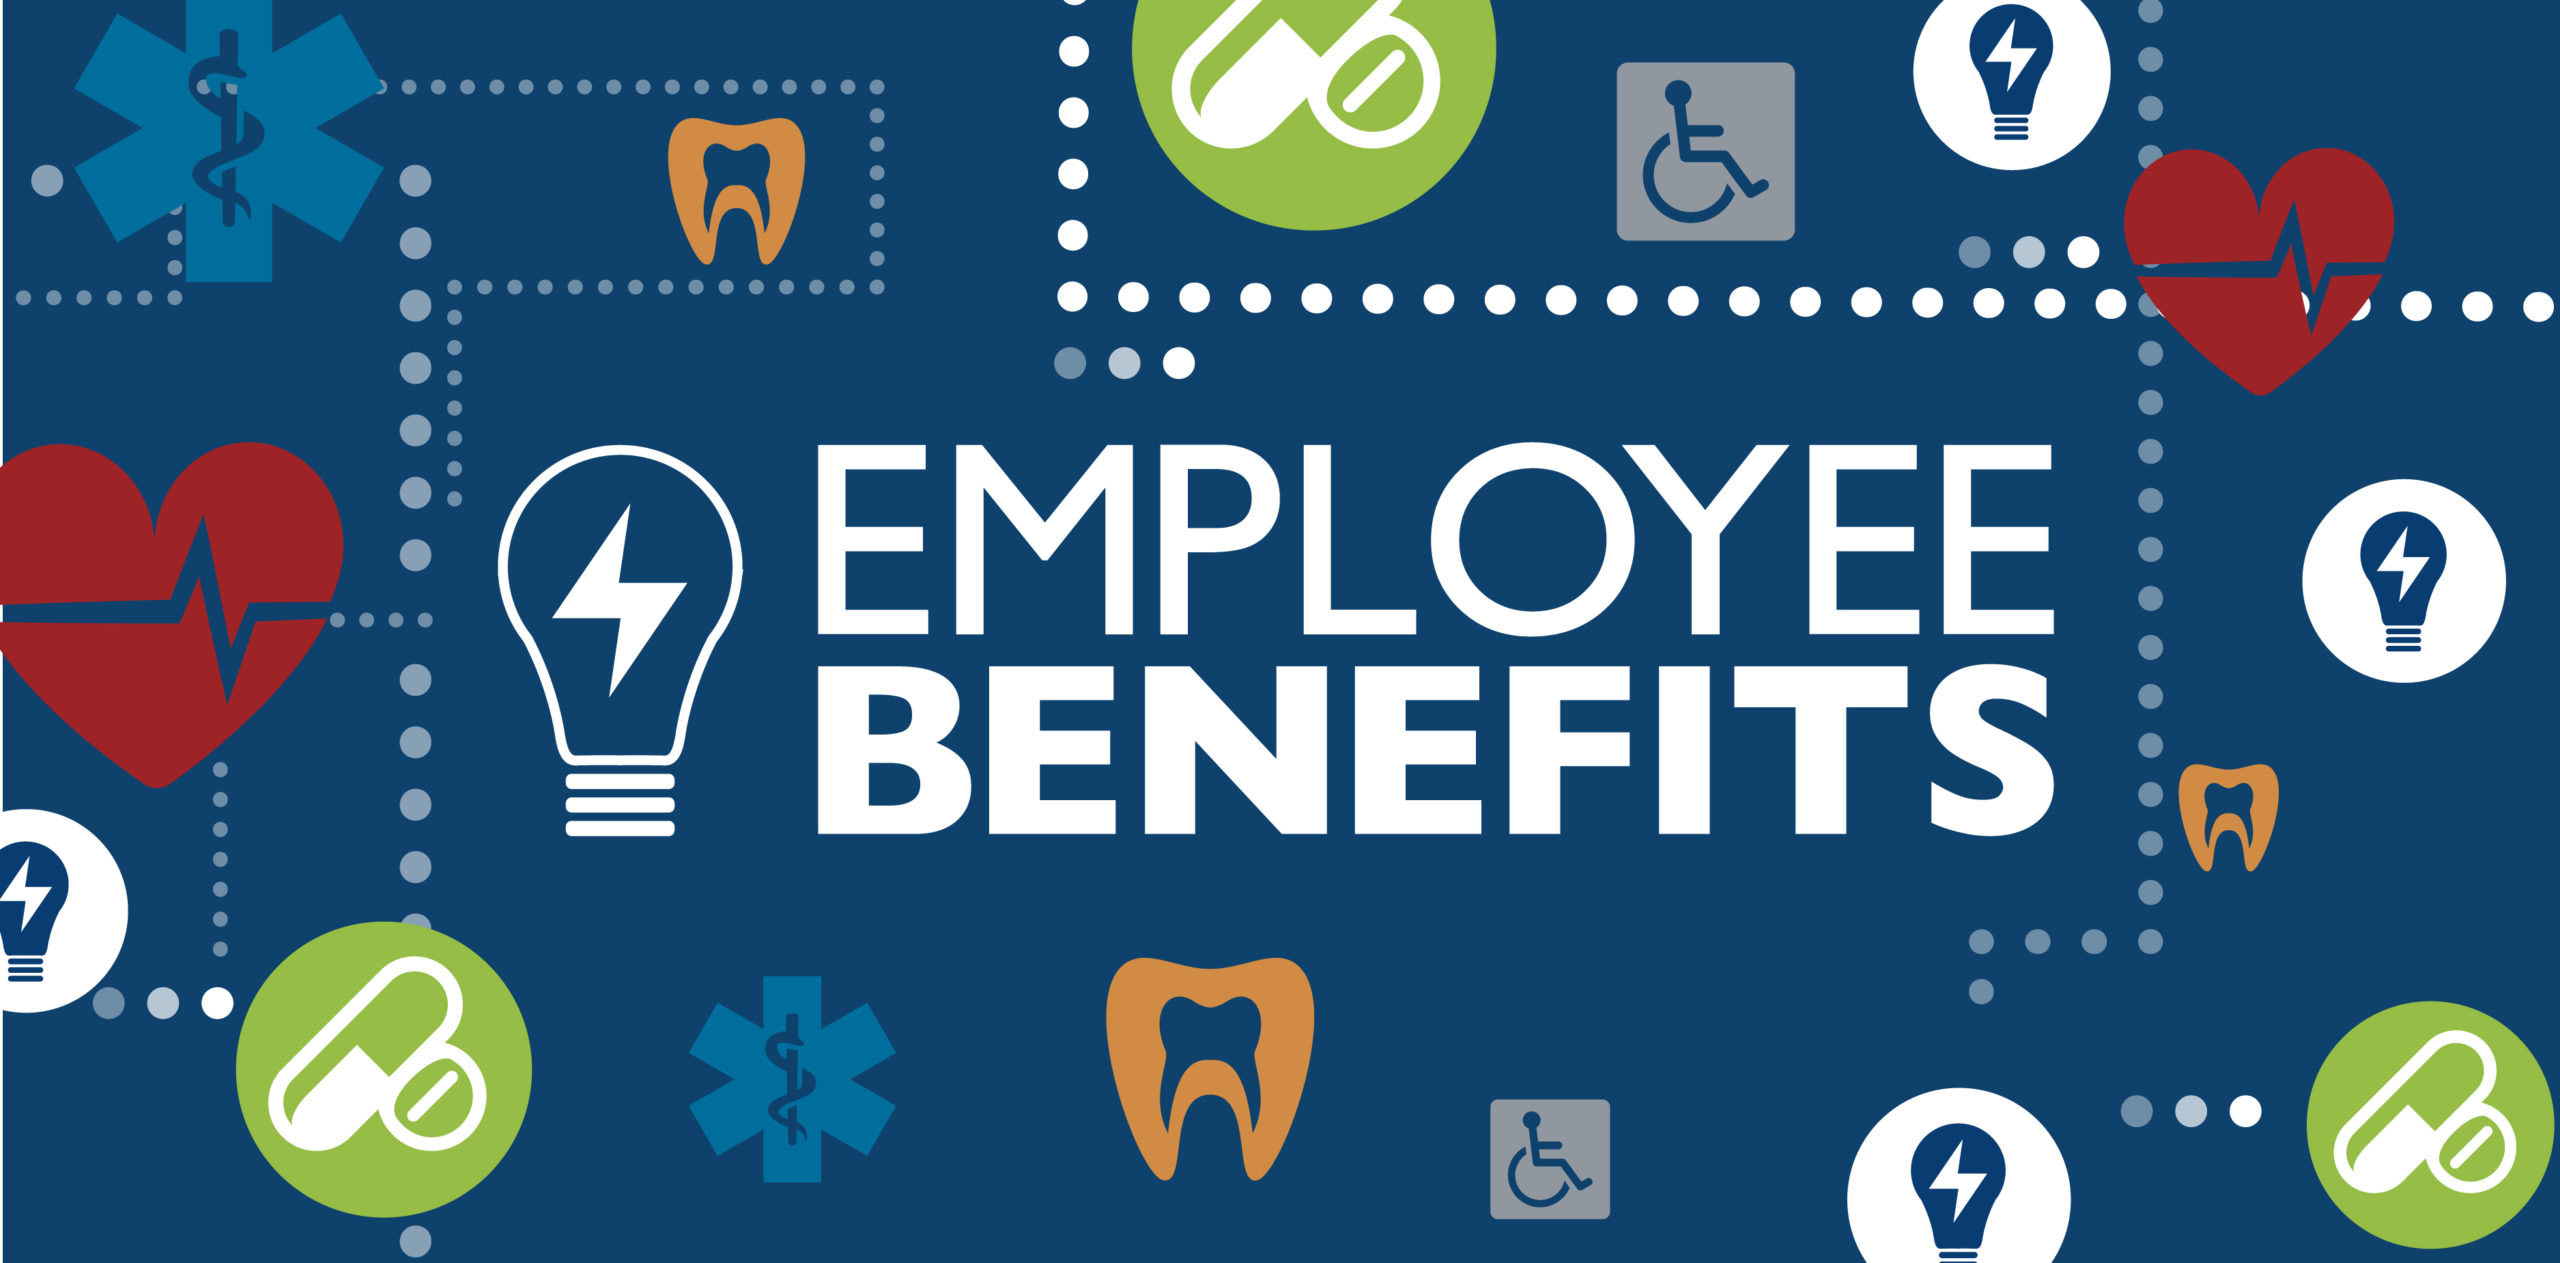 Most employees don’t understand their benefits. Here’s how to make sure you aren’t wasting your money